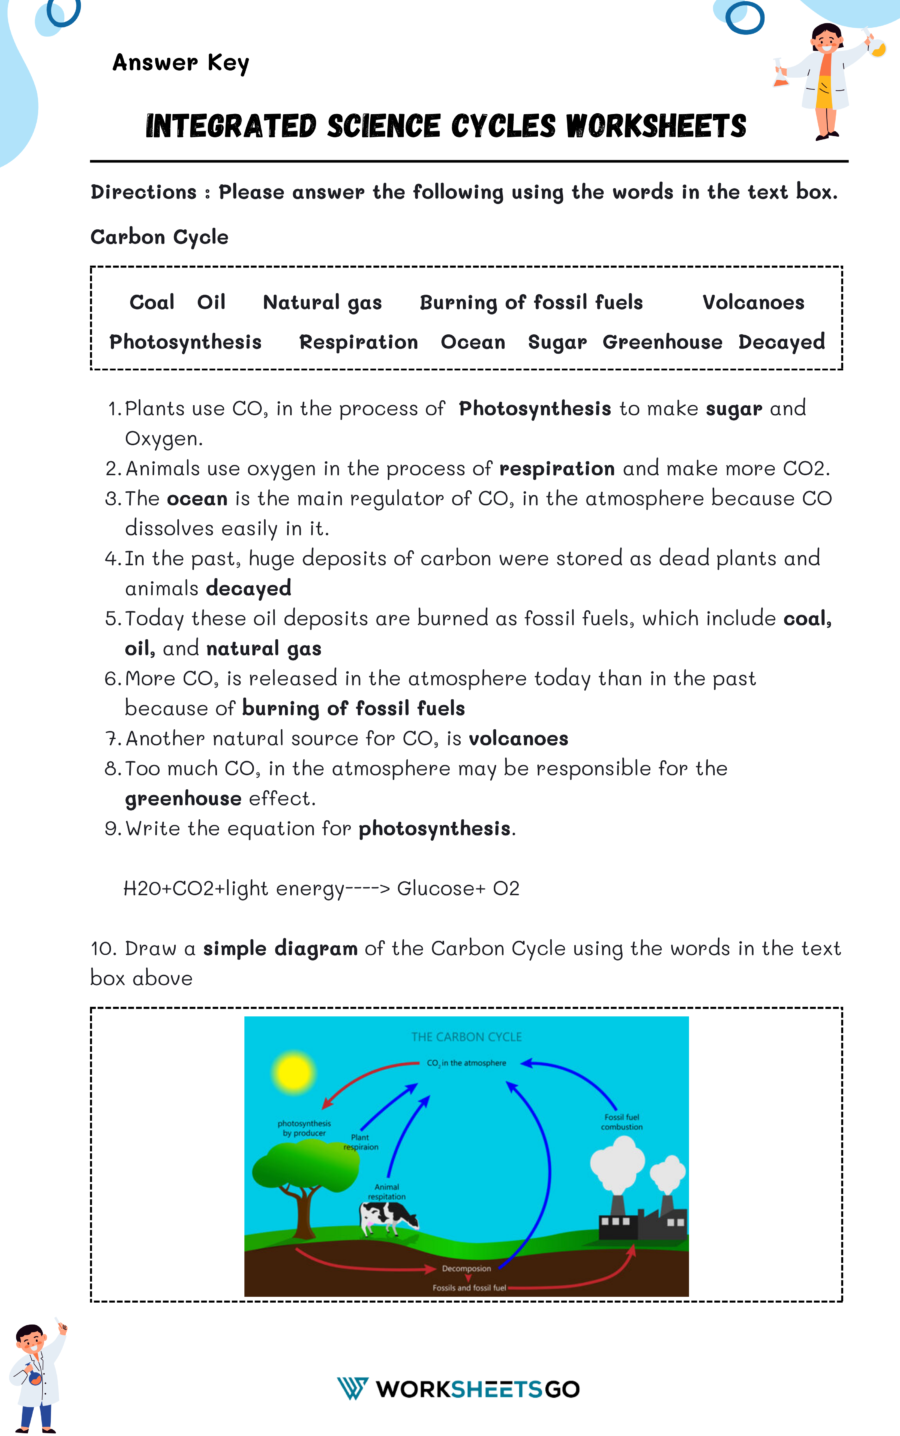 Integrated Science Cycles, Carbon Cycle Worksheet Answer Key